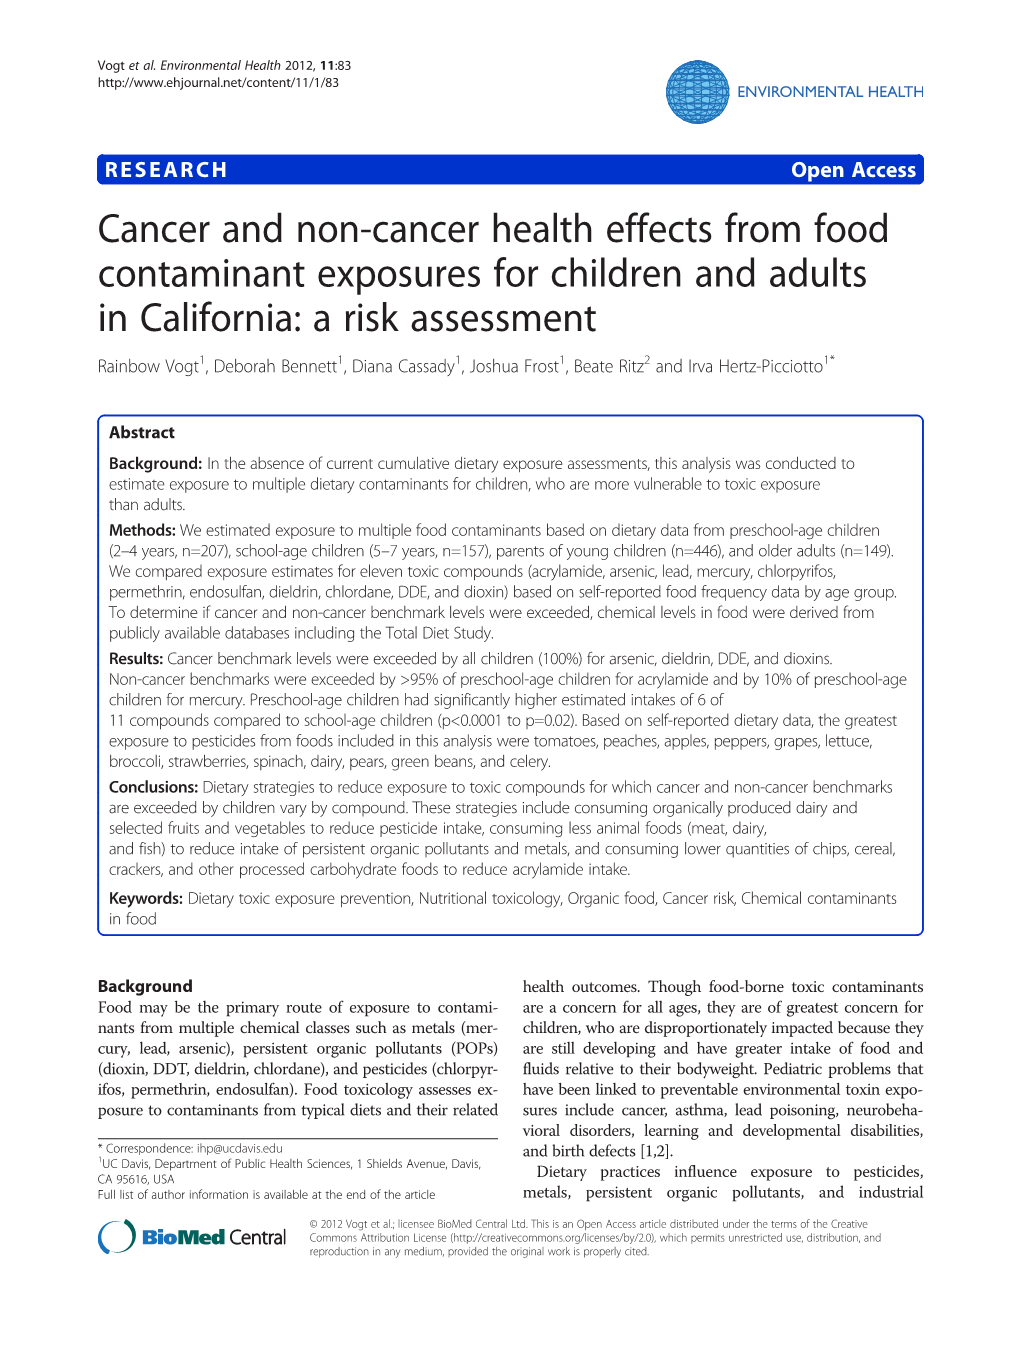 Cancer and Non-Cancer Health Effects from Food Contaminant Exposures for Children and Adults in California: a Risk Assessment